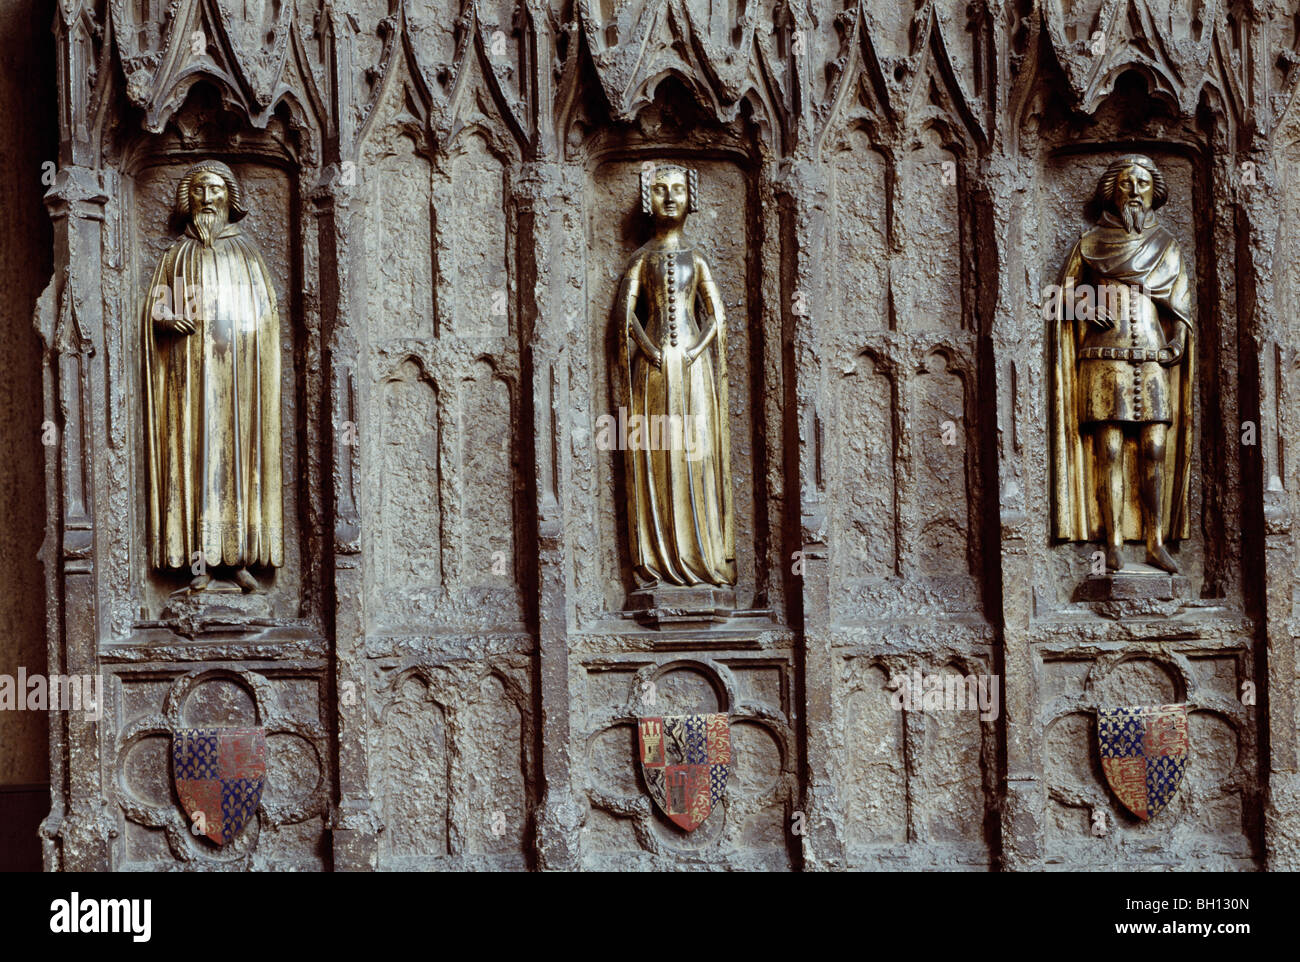 Edward III tomb in Westminster Abbey. Bronze weepers (or statuettes) of his children round the tomb. Stock Photo